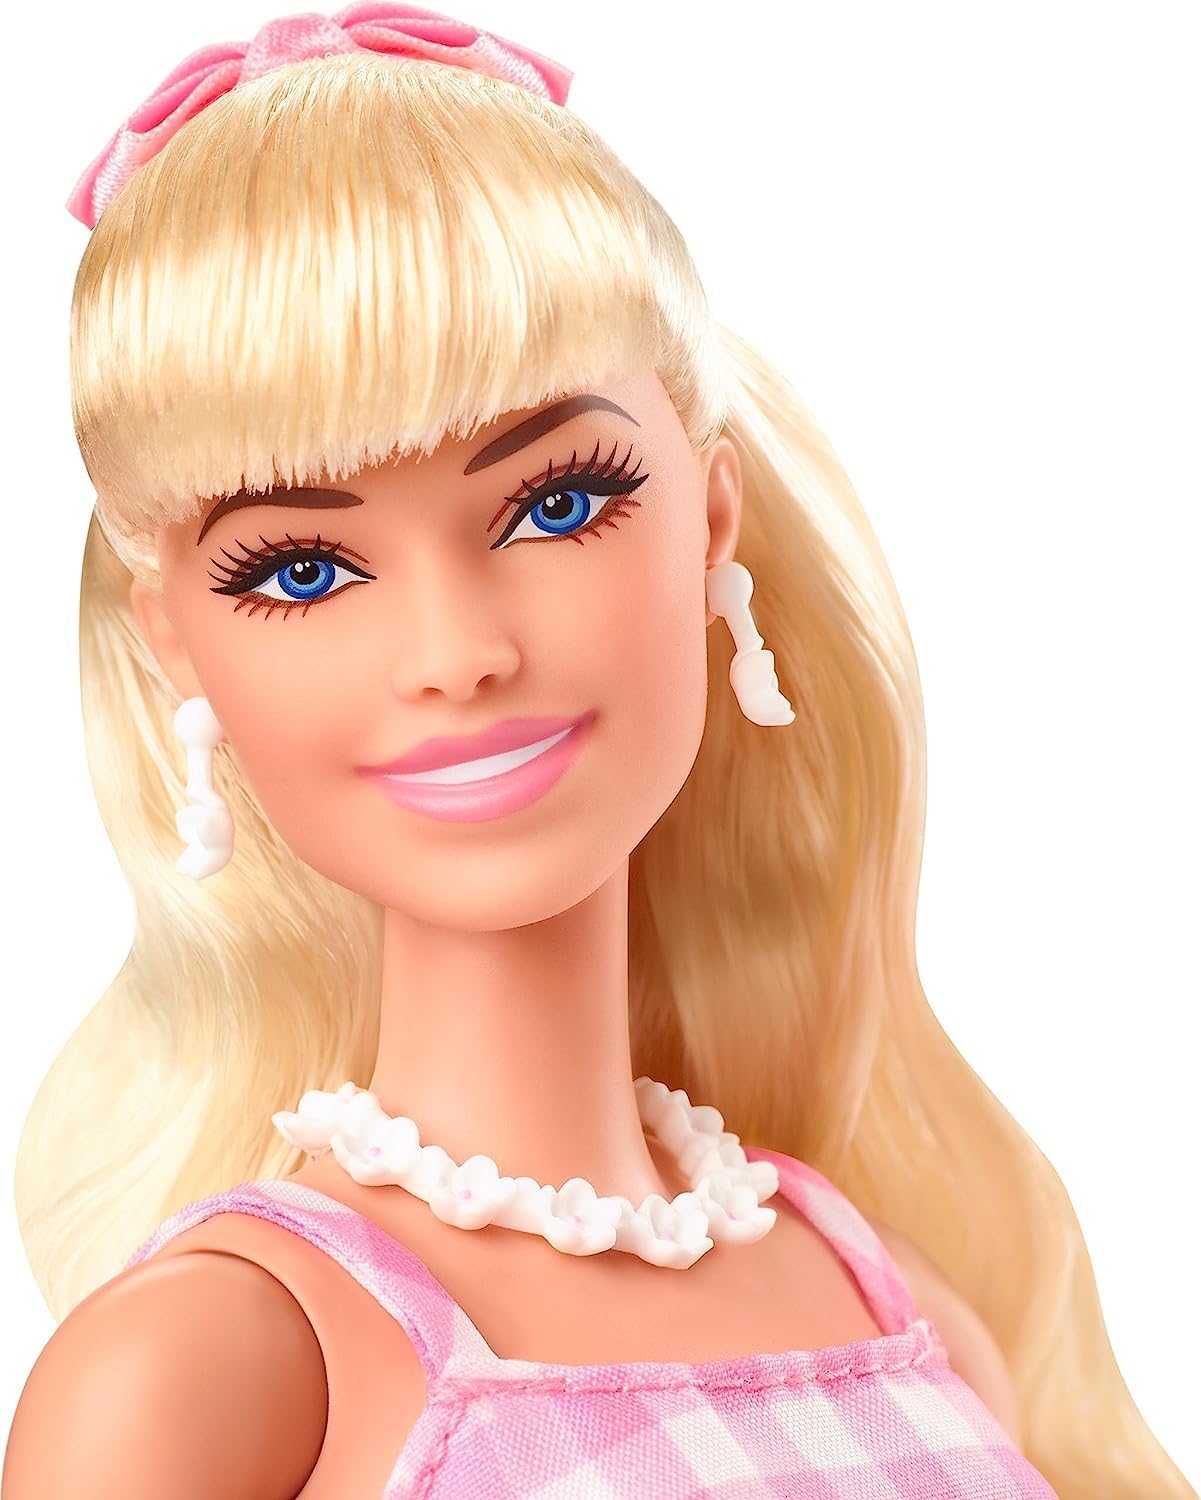 Margot Robbie as Barbi, 35X20 cm Collectible Doll Wearing Pink and White Gingham Dress with Daisy Chain Necklace